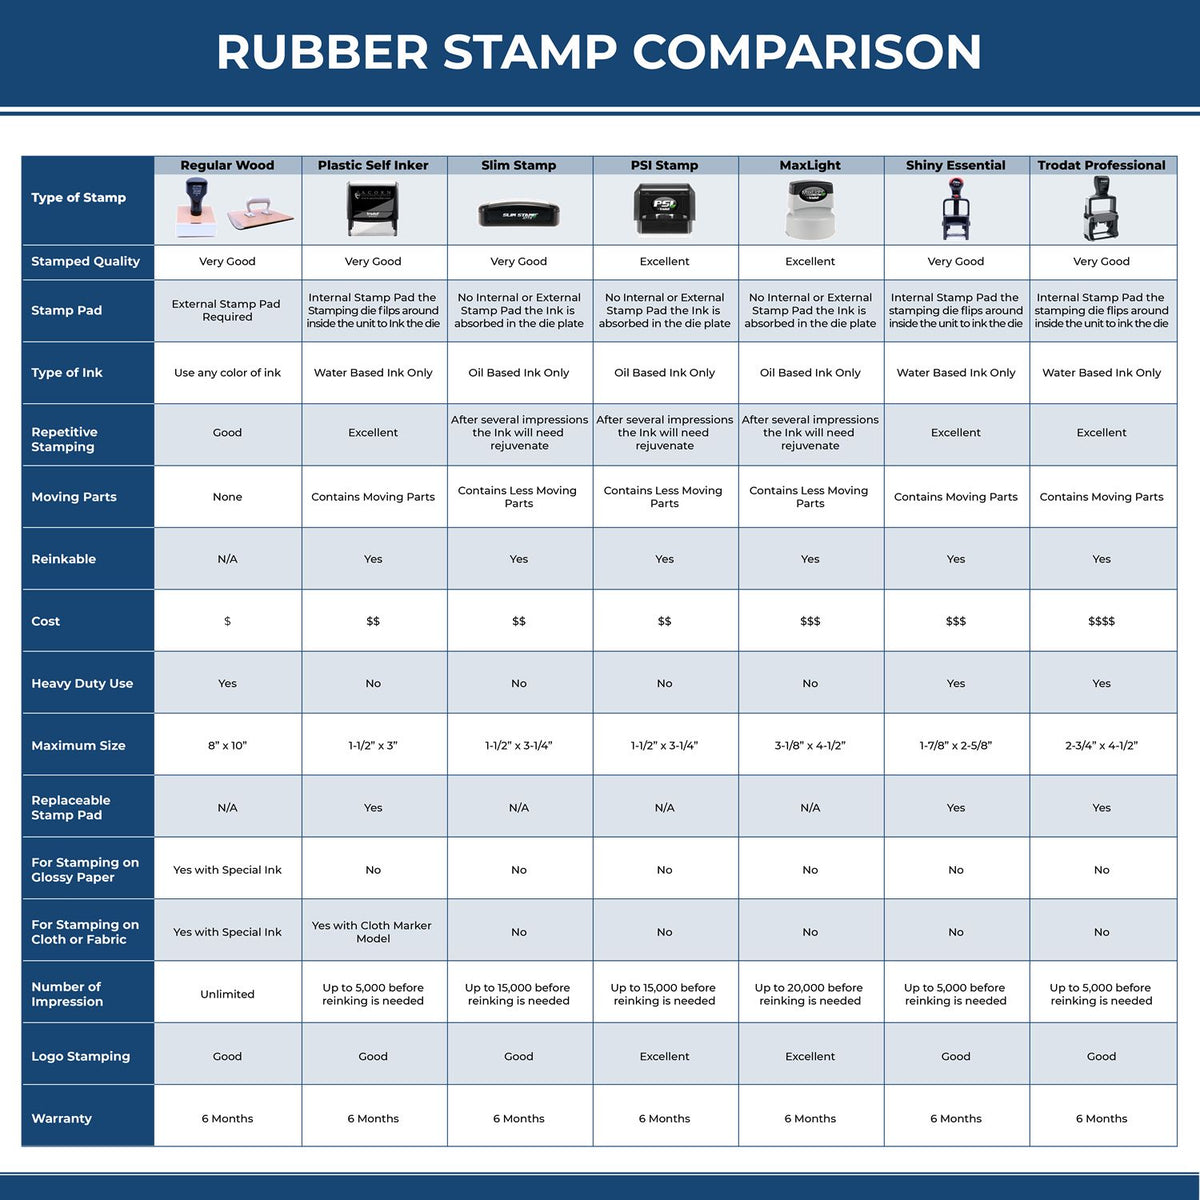 A comparison chart for the different types of mount models available for the Premium MaxLight Pre-Inked Indiana Engineering Stamp.